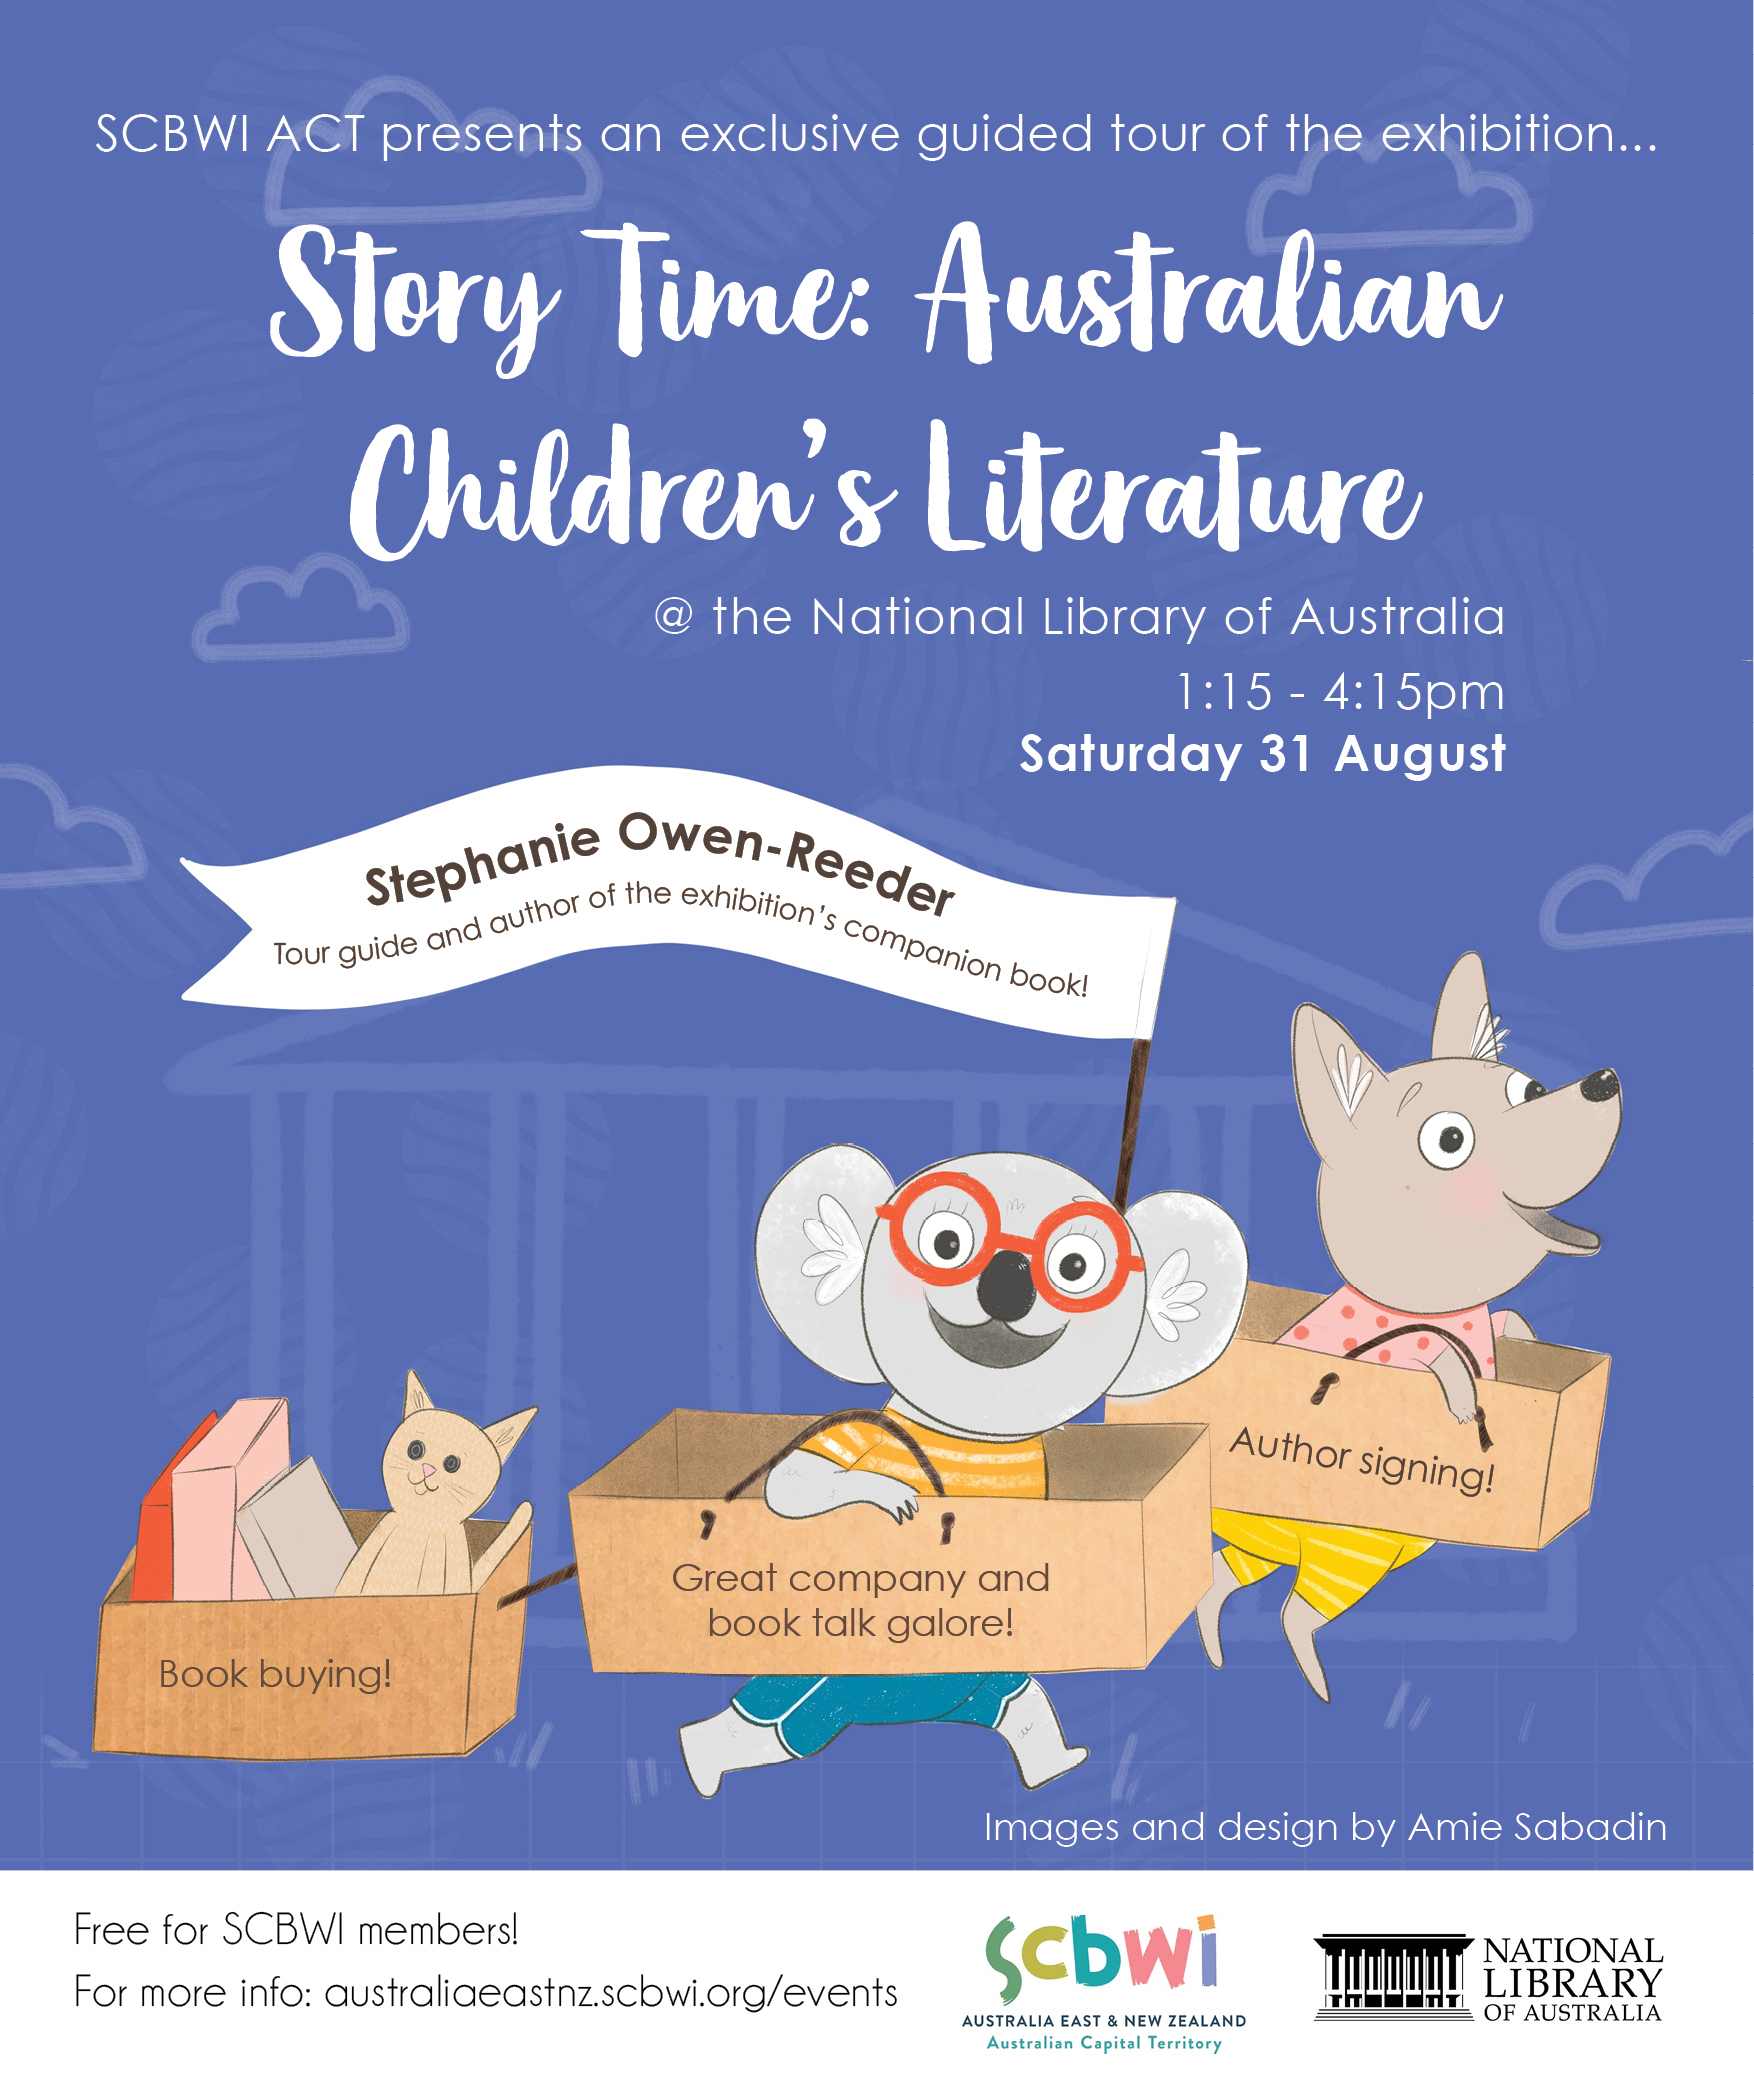 Design and illustration for a SCBWI ACT event at the National Library of Australia.